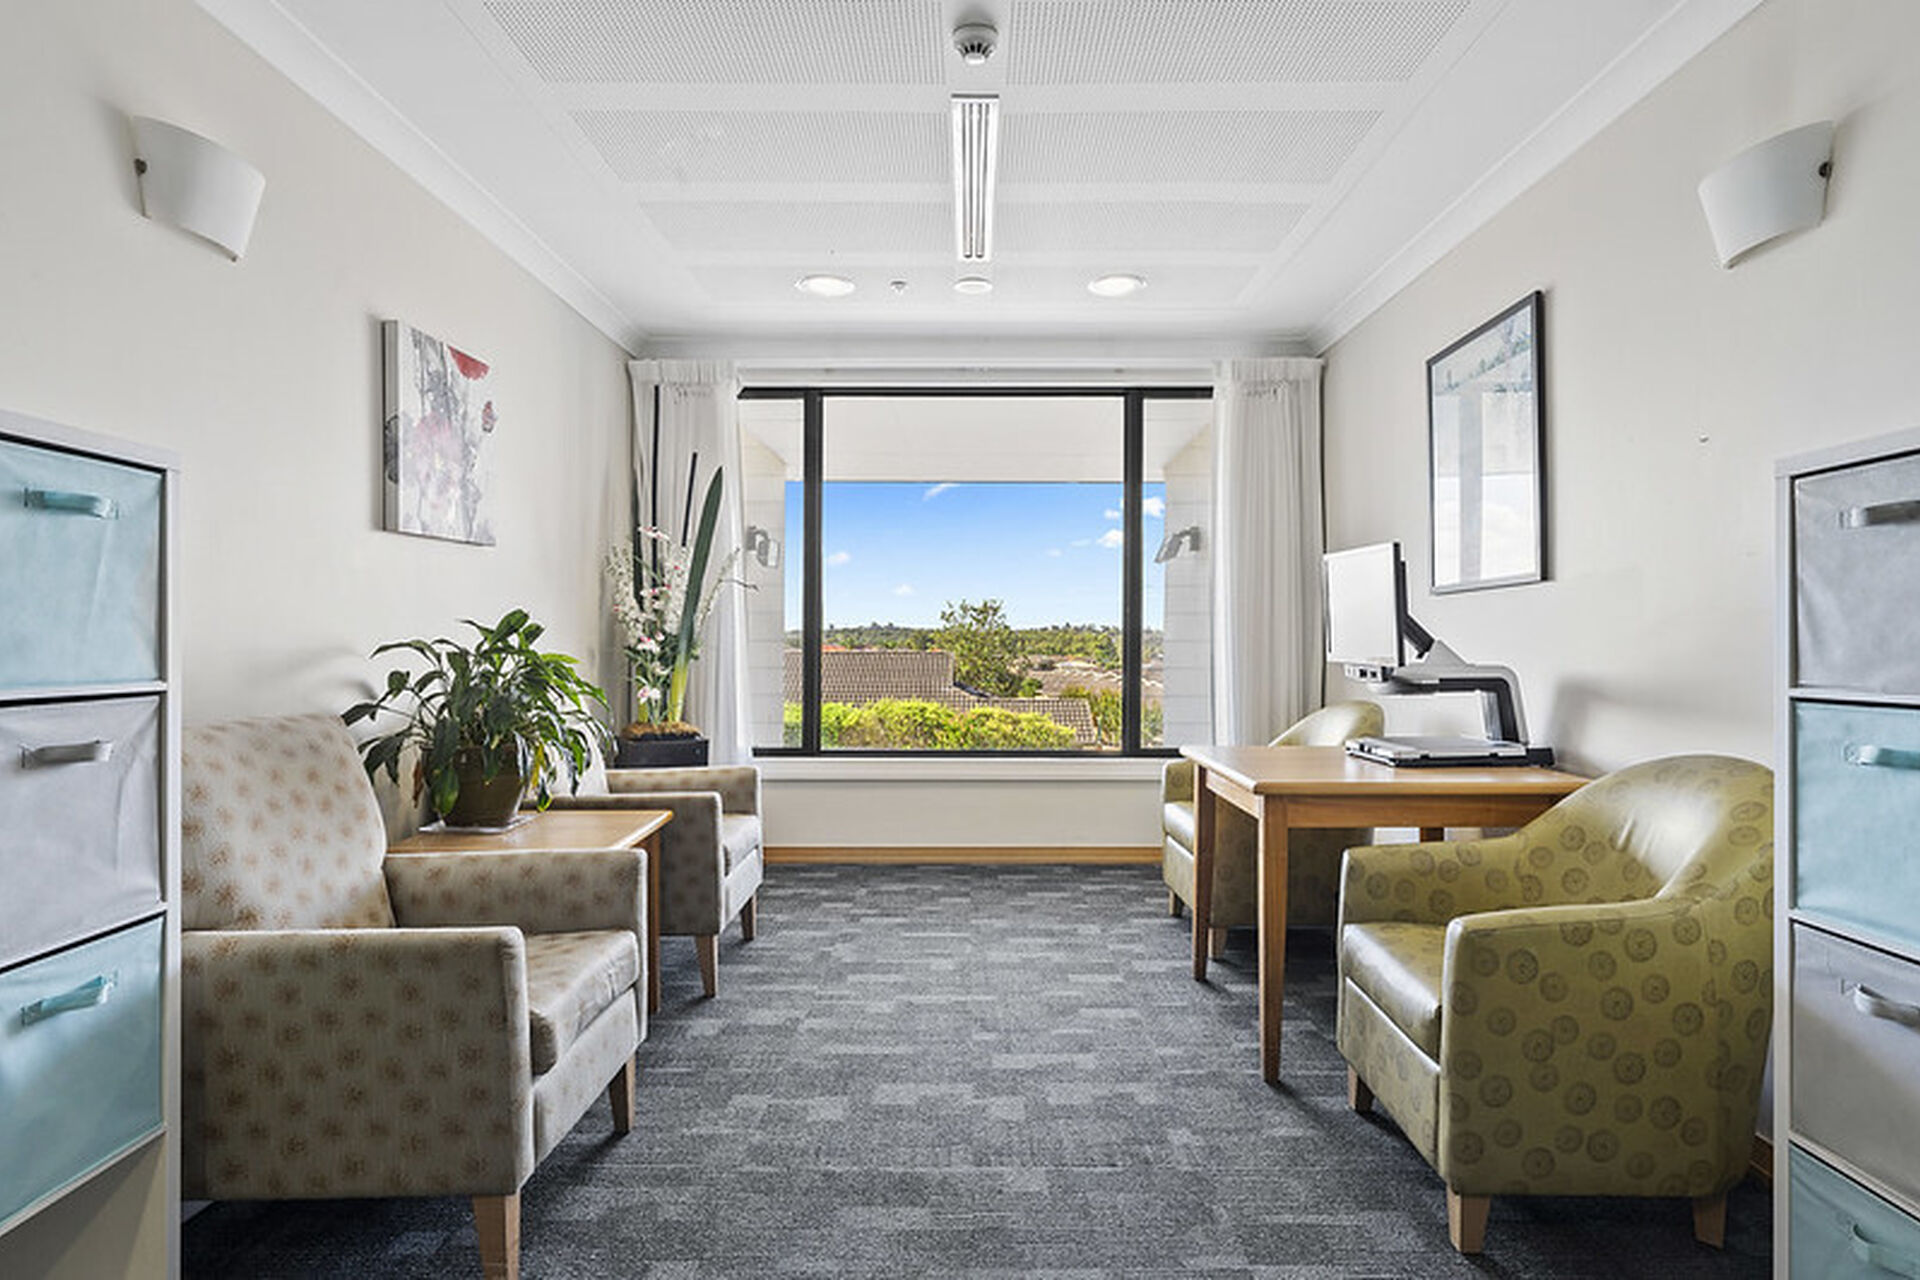 communal reading sitting space for aged care residents to enjoy quiet time at baptistcare blue hills manor residential aged care home in prestons nsw